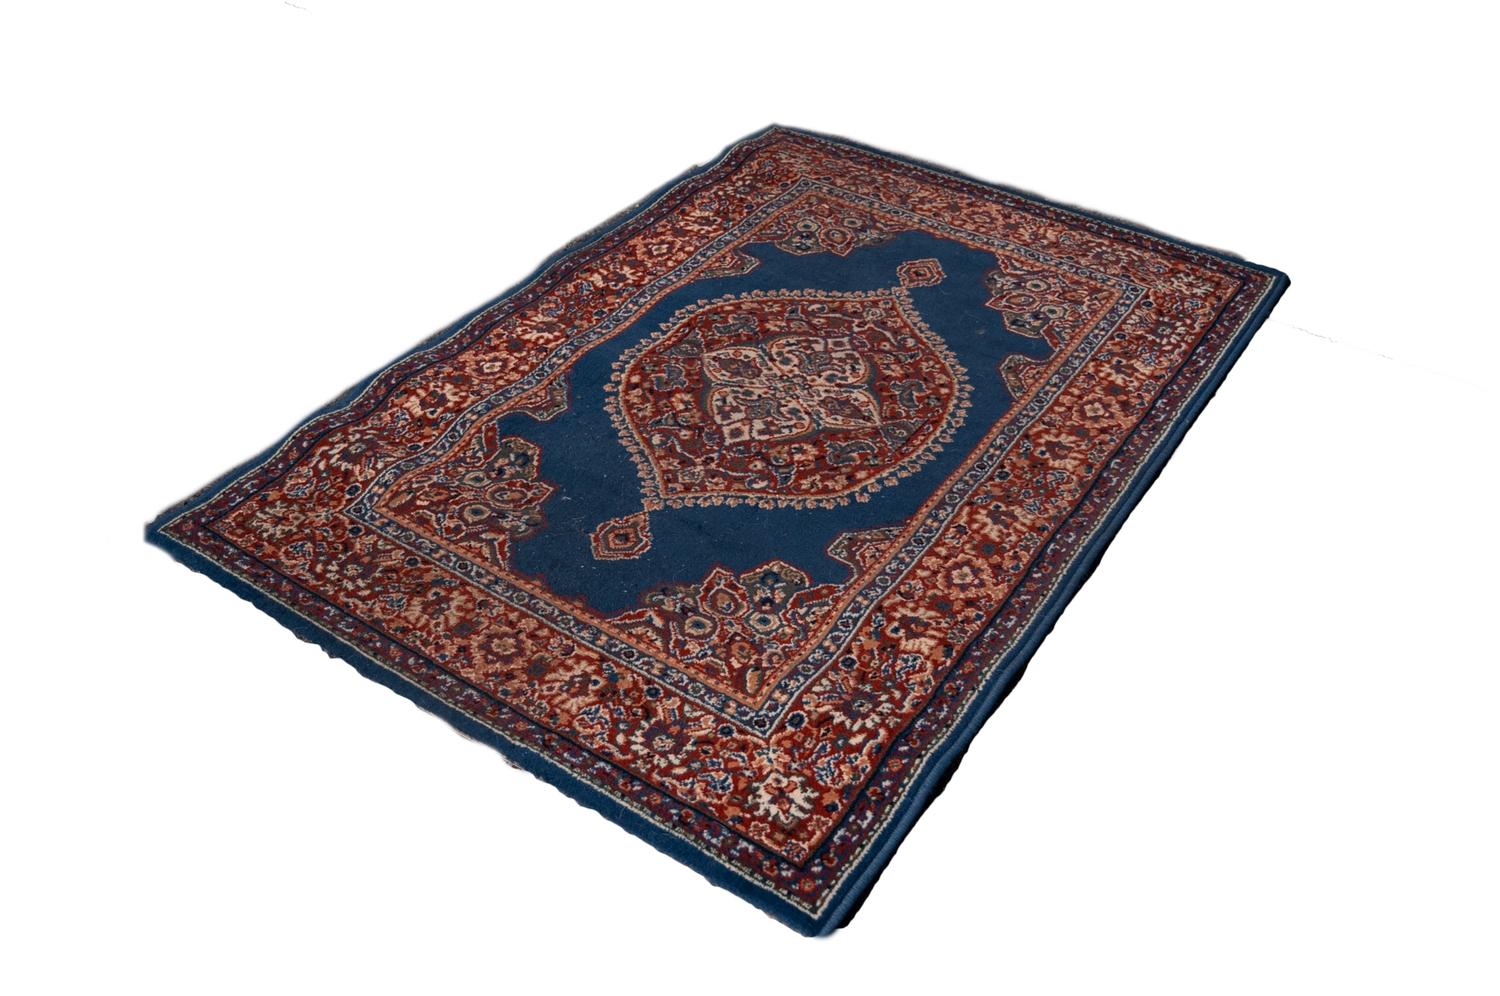 PERSIAN SEMI ANTIQUE GOREVAN RUG with concentric diamond shaped pale blue medallion in a larger